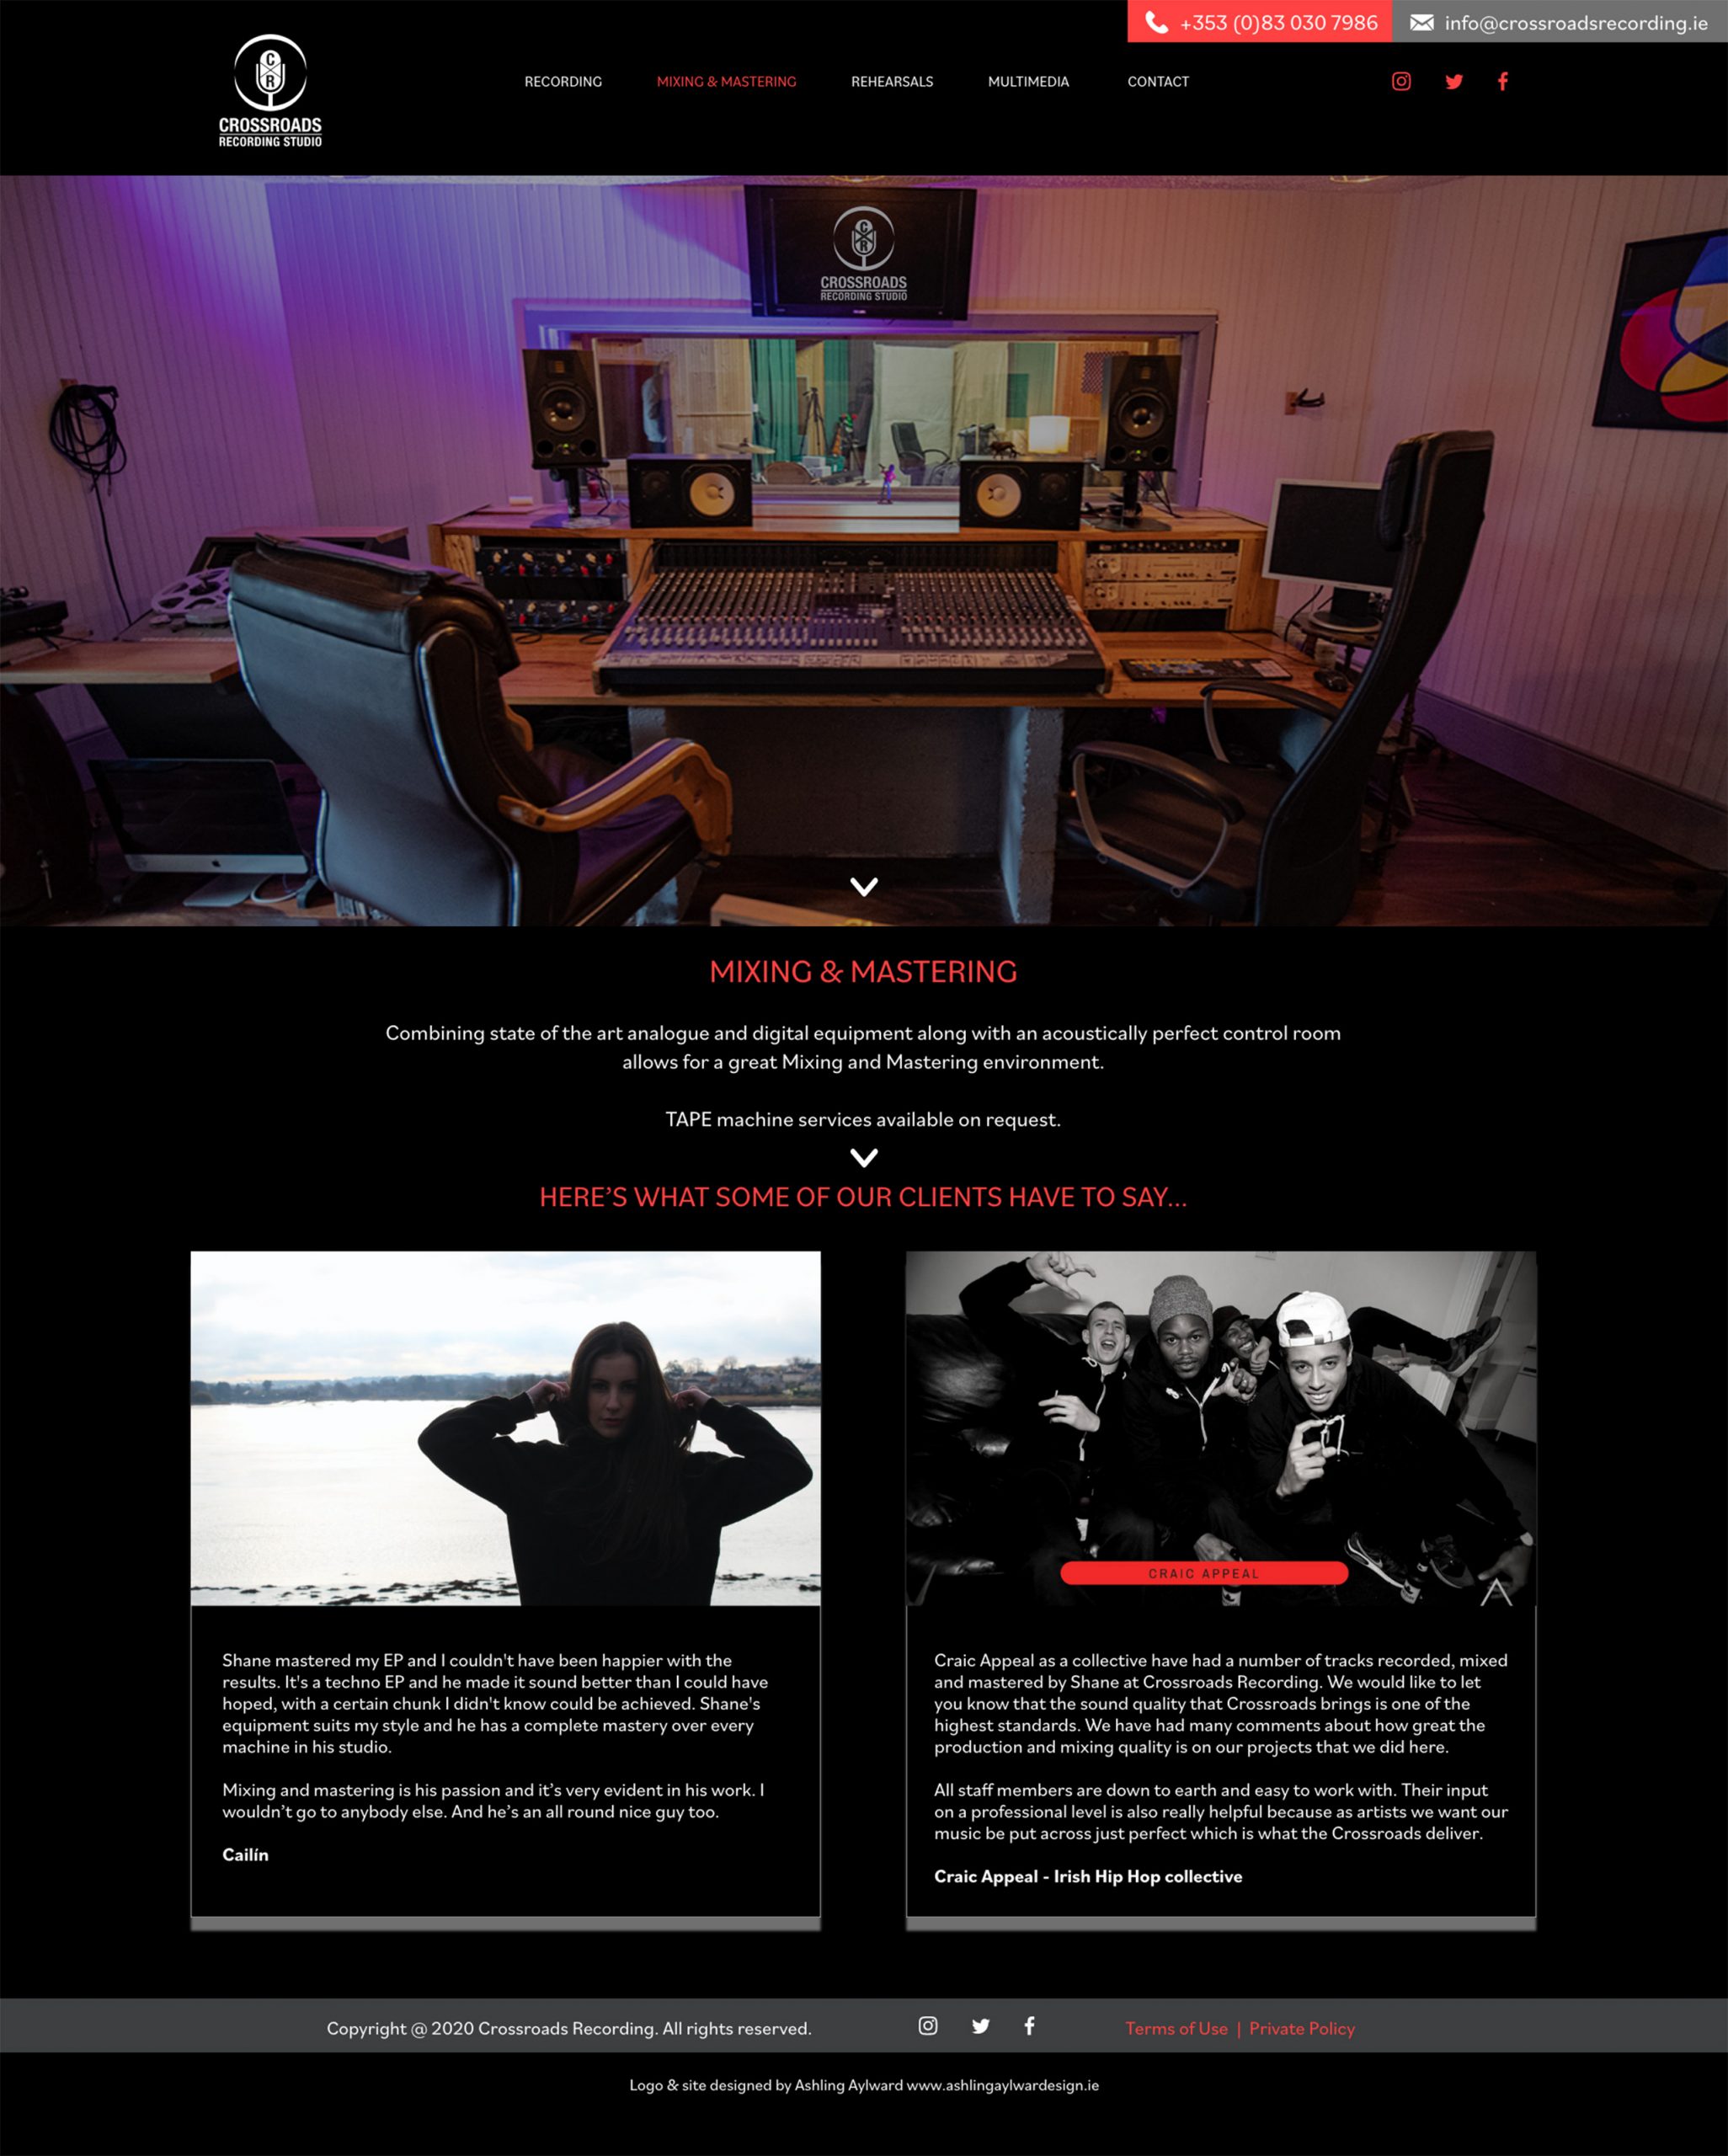 4. Mixing & Mastering 1920px wide